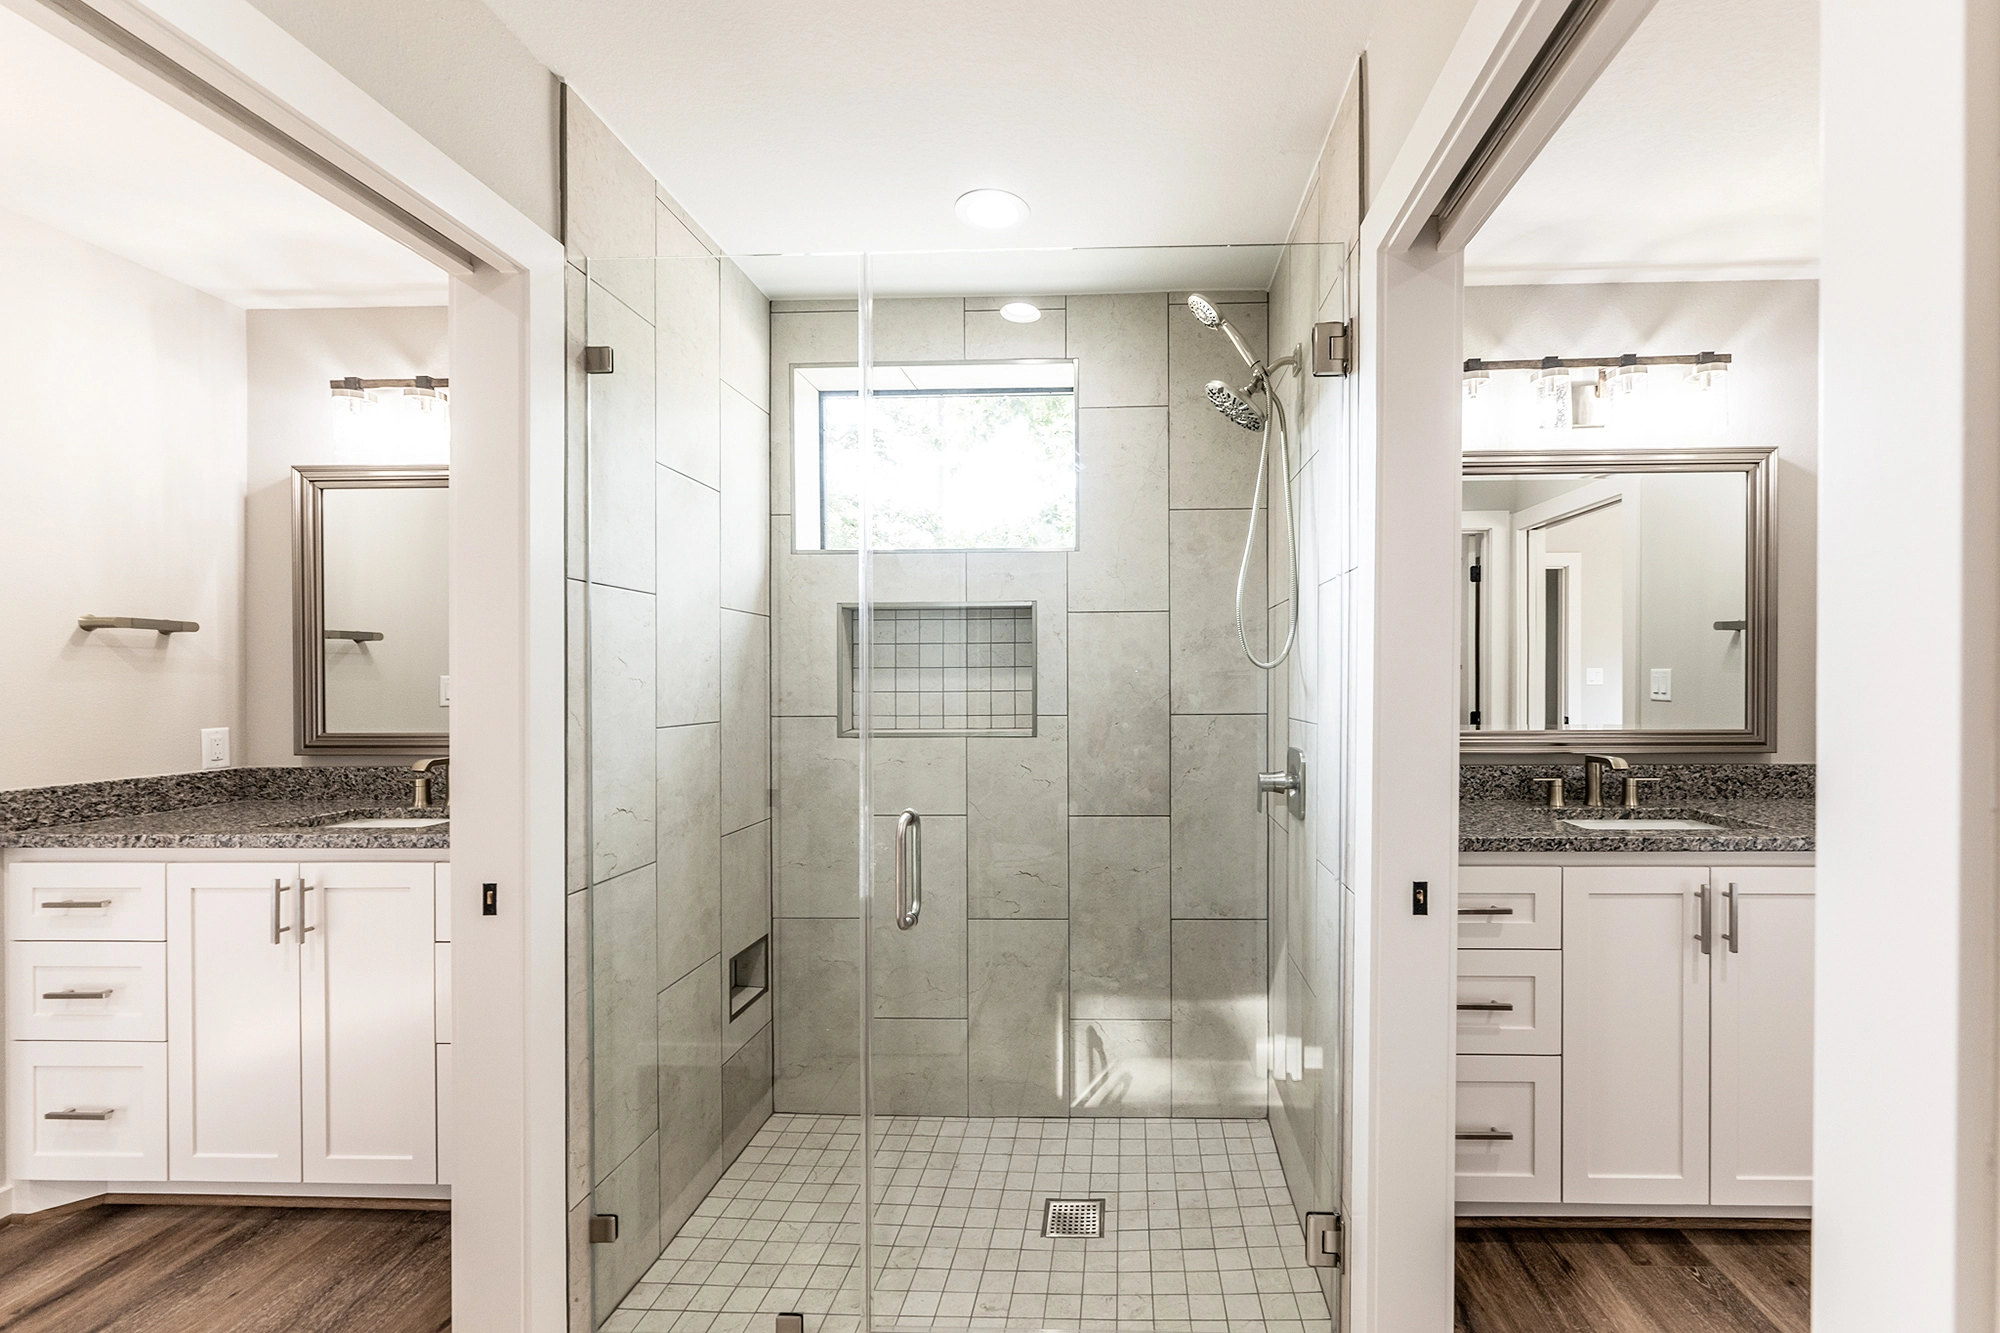 A modern bathroom featuring two vanity rooms